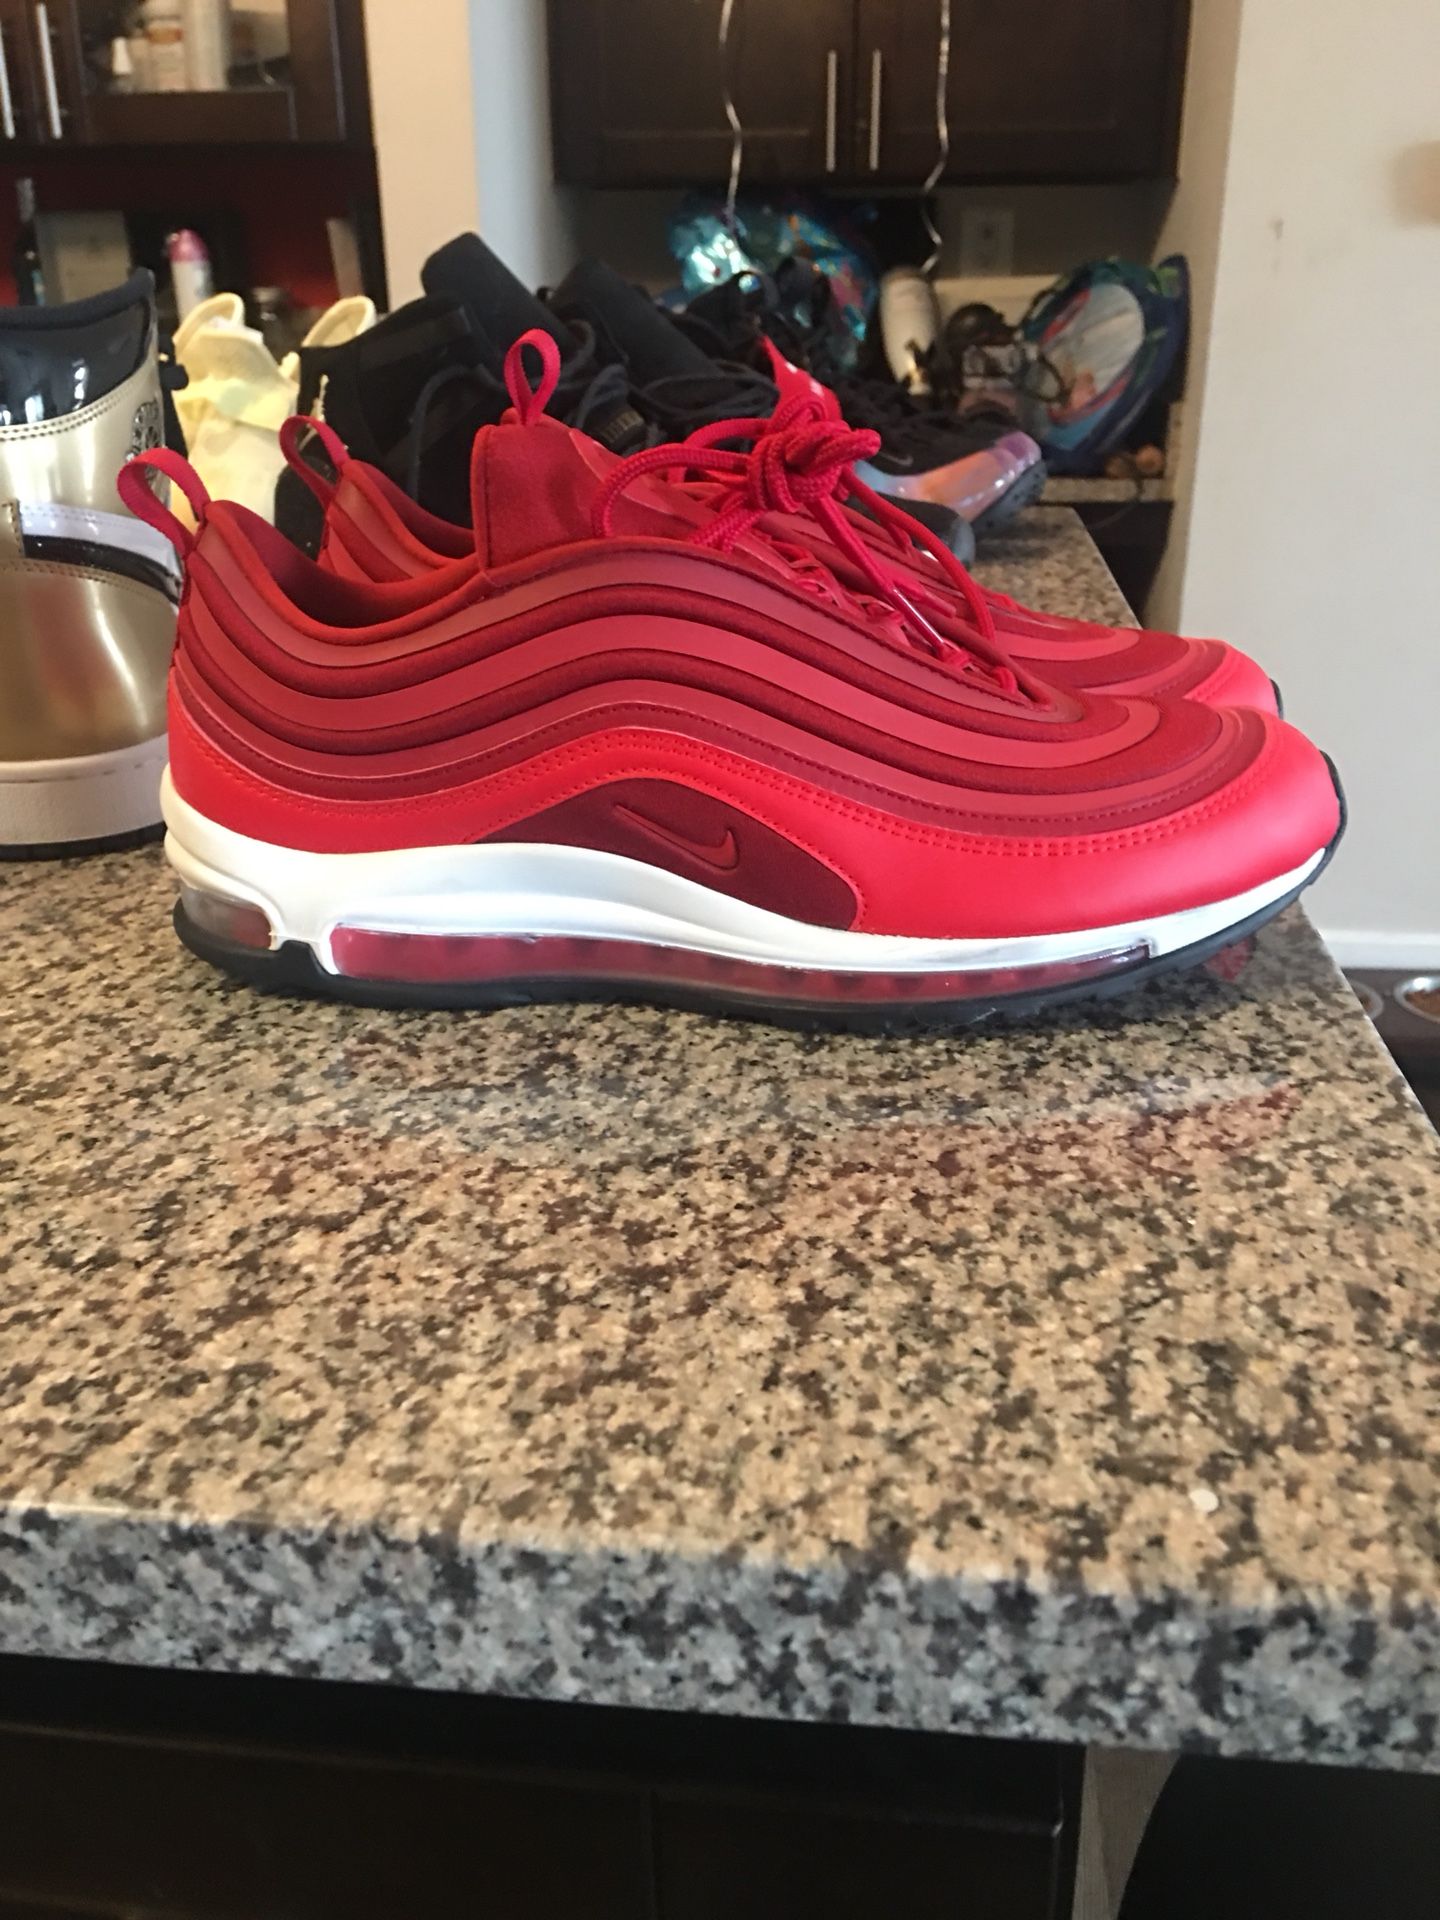 Red Air Max Dead Stock Brand New Size Womens 11 Men’s 9